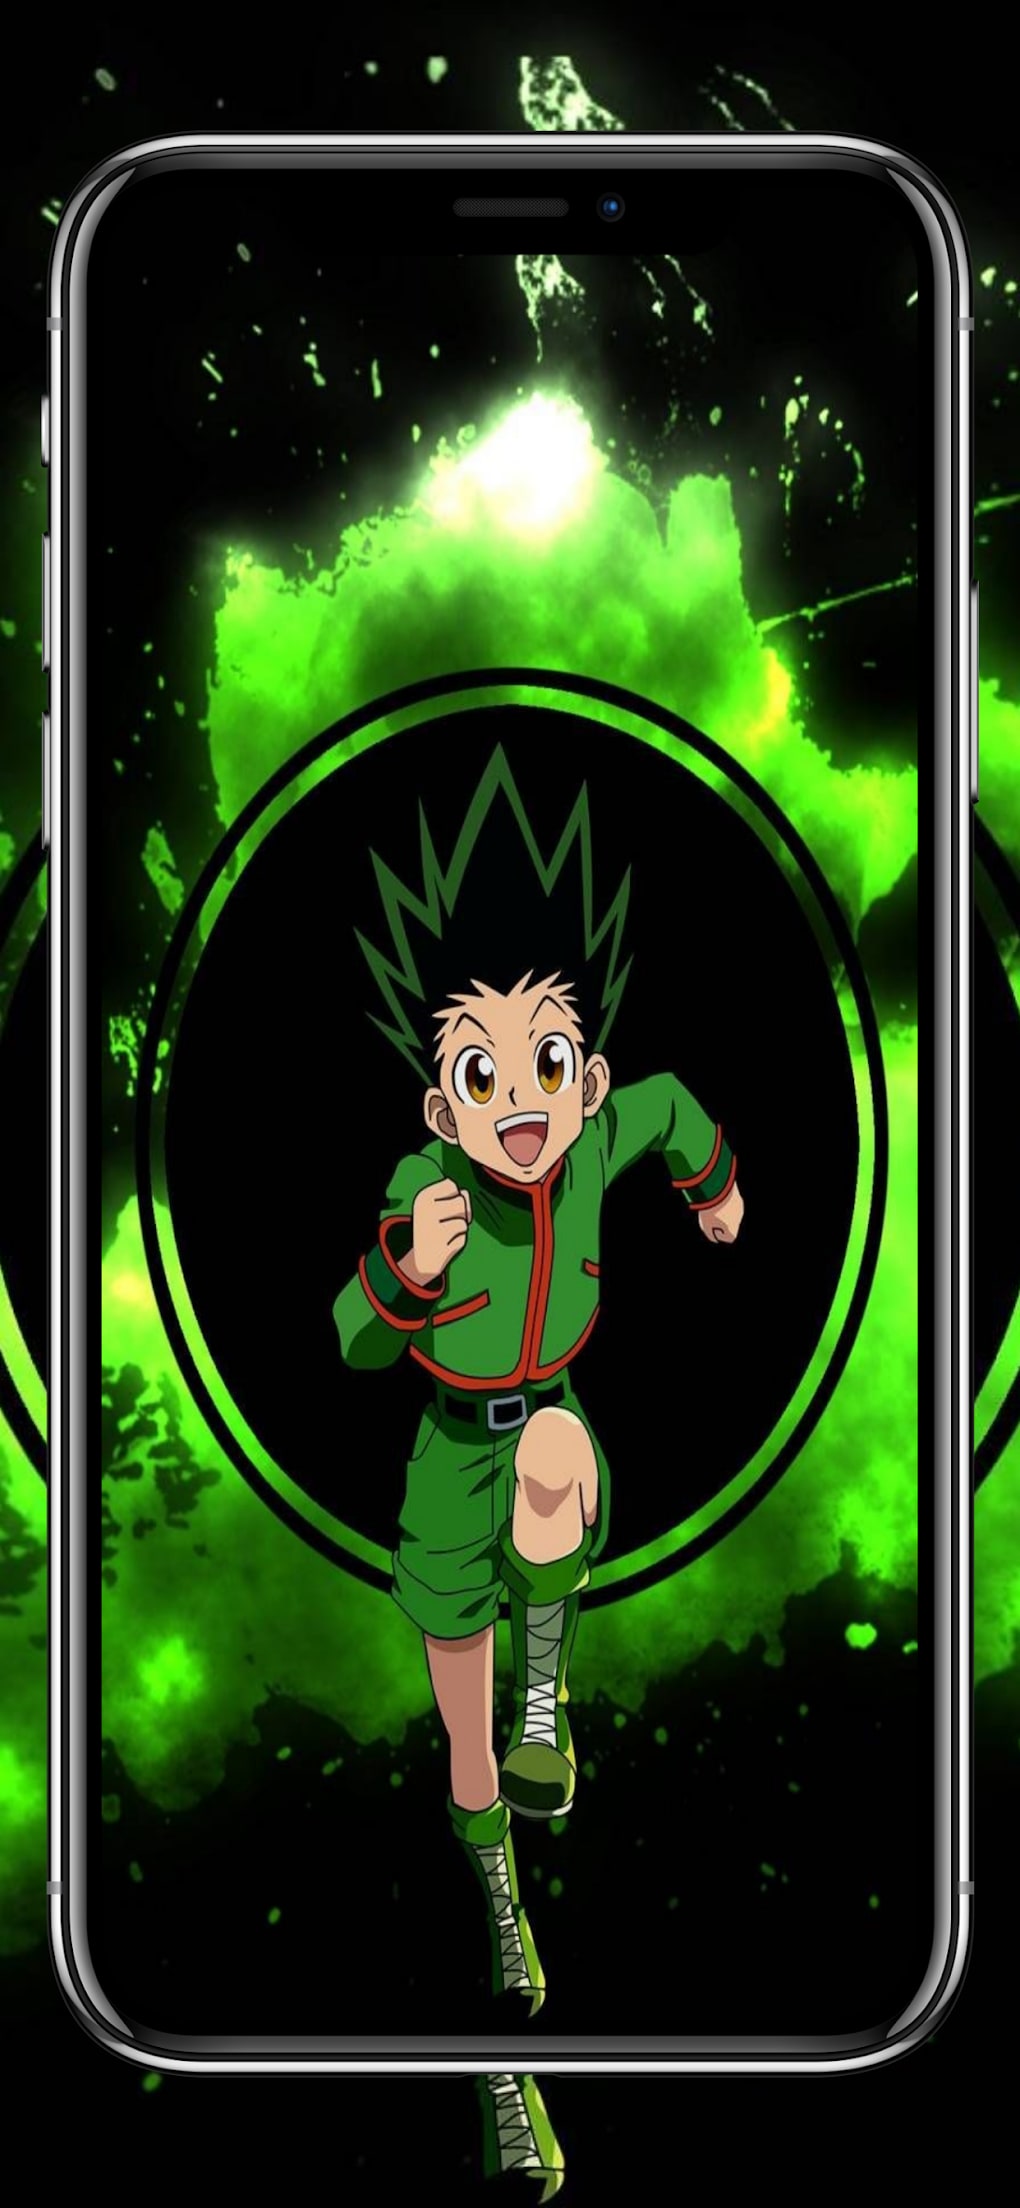 Hunter x hunter android HD wallpapers